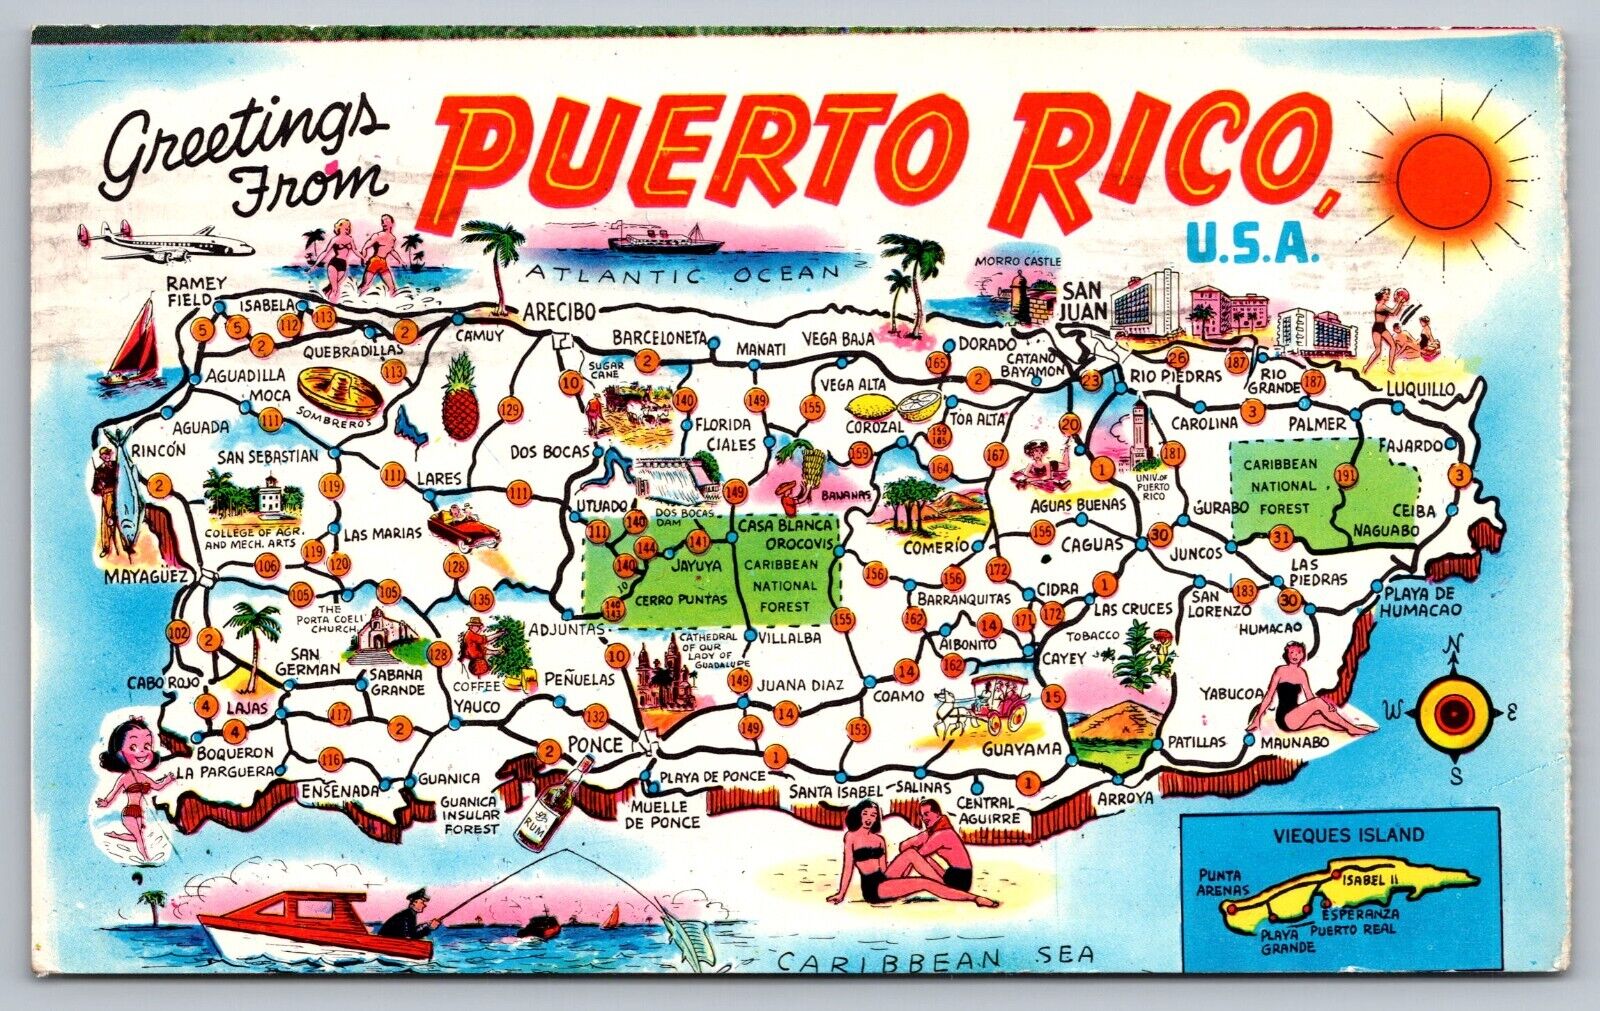 Greetings from Puerto Rico-VTG Pictorial Map Postcard-w/Landmarks & Attractions